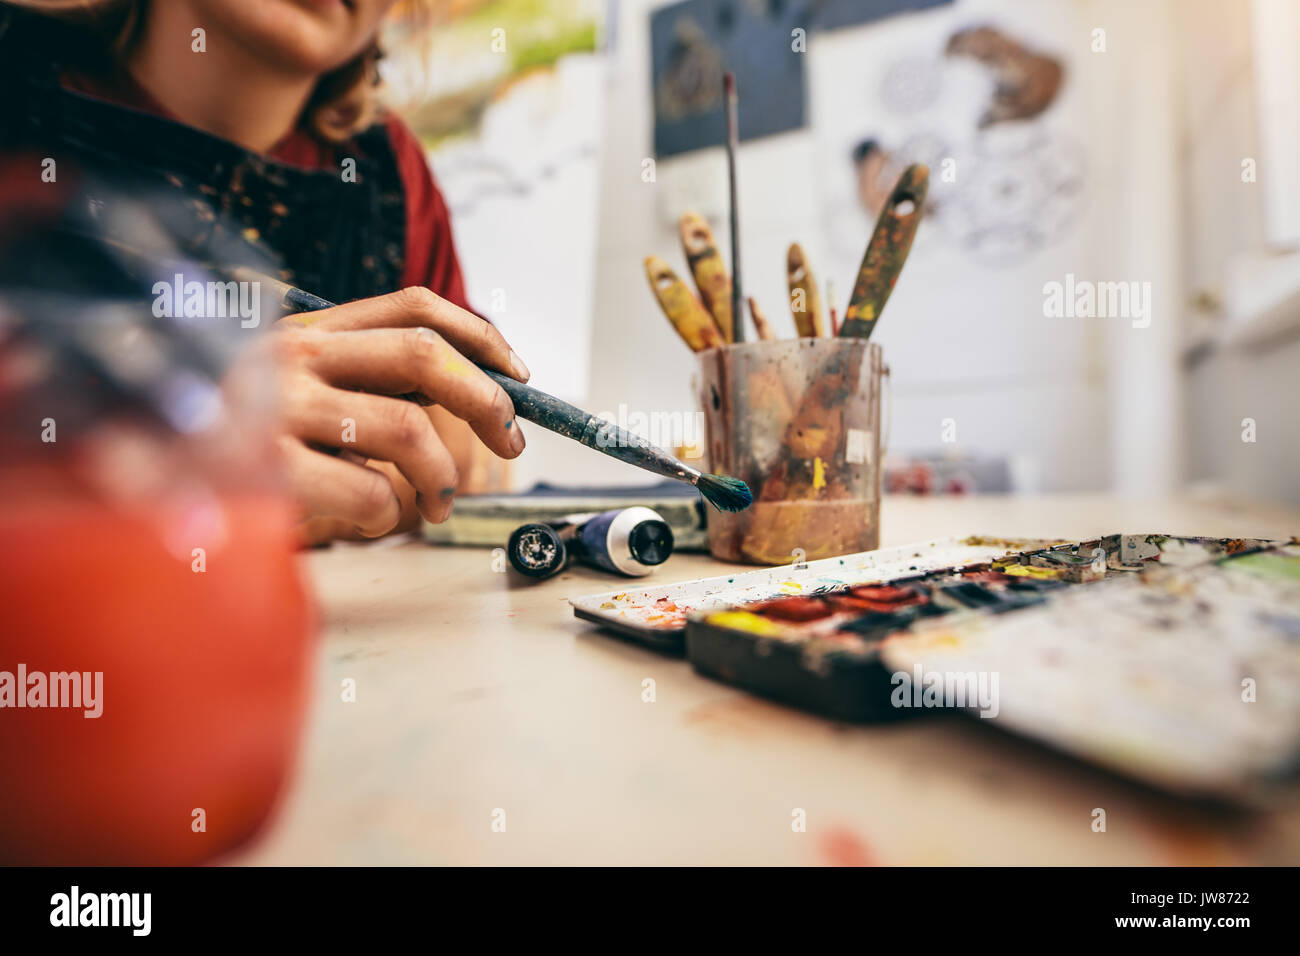 https://c8.alamy.com/comp/JW8722/close-up-shot-of-female-artist-hand-holding-brush-and-drawing-picture-JW8722.jpg